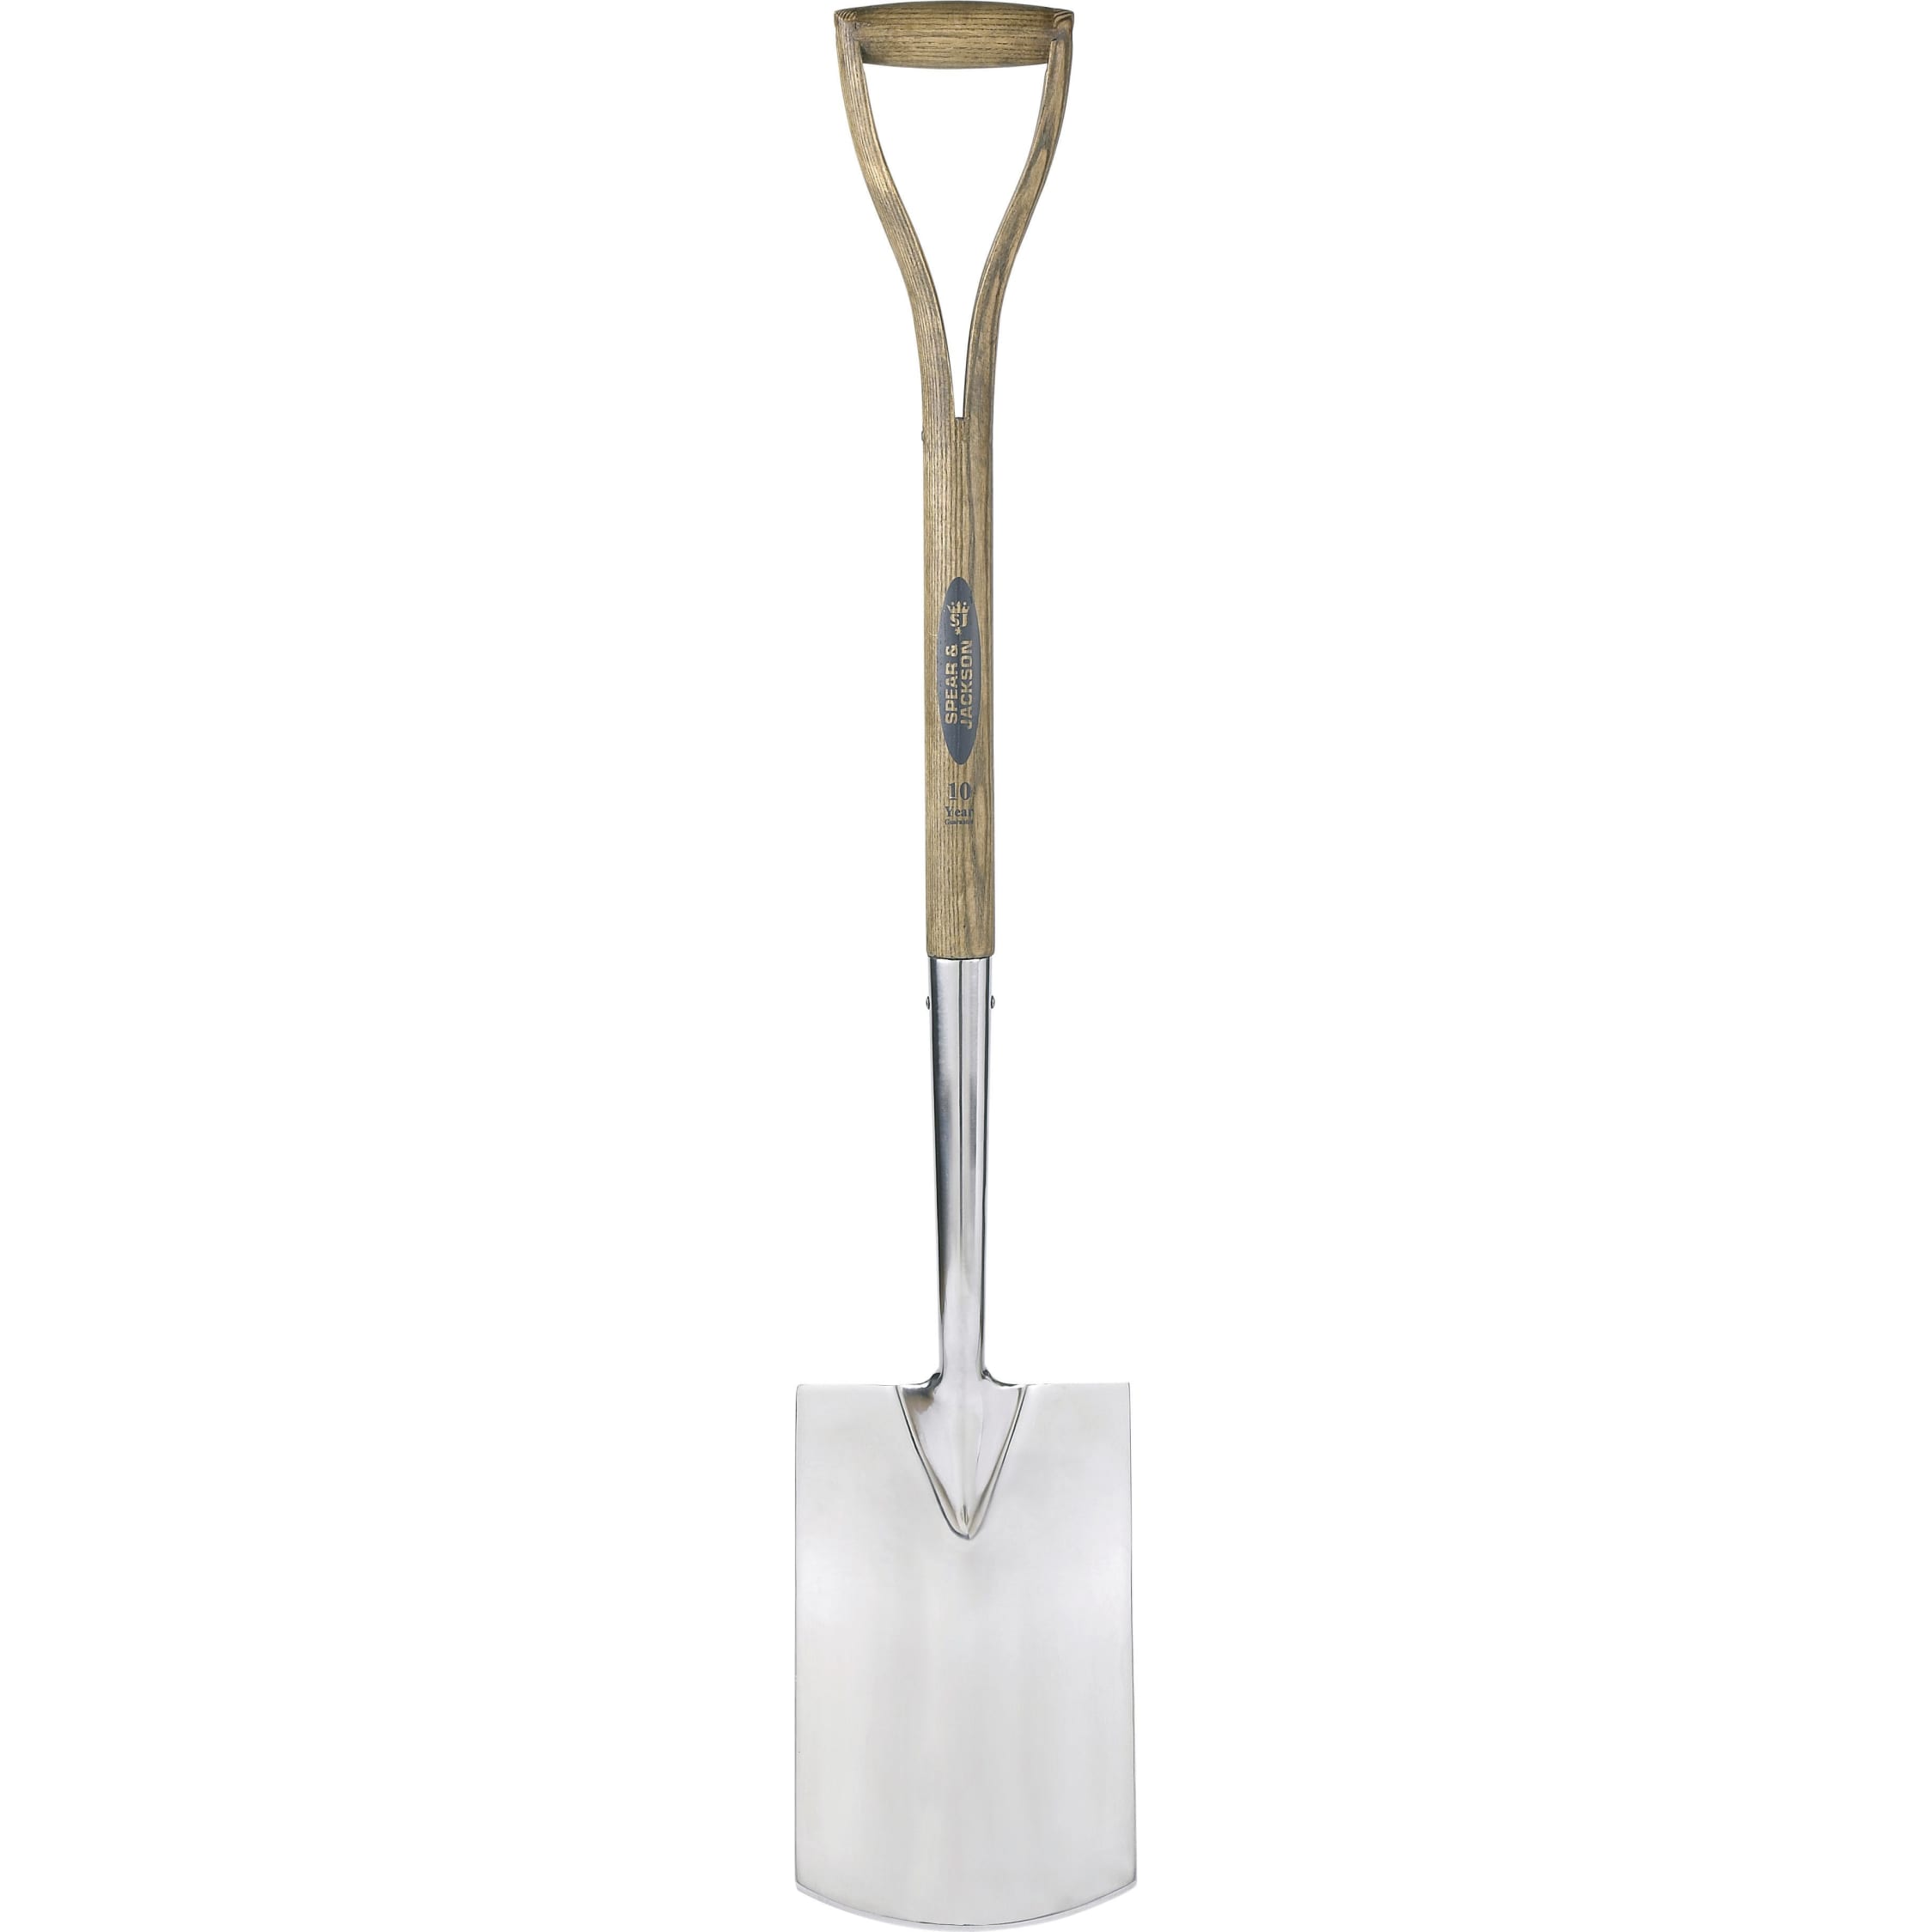 Spear & Jackson Traditional Digging Spade